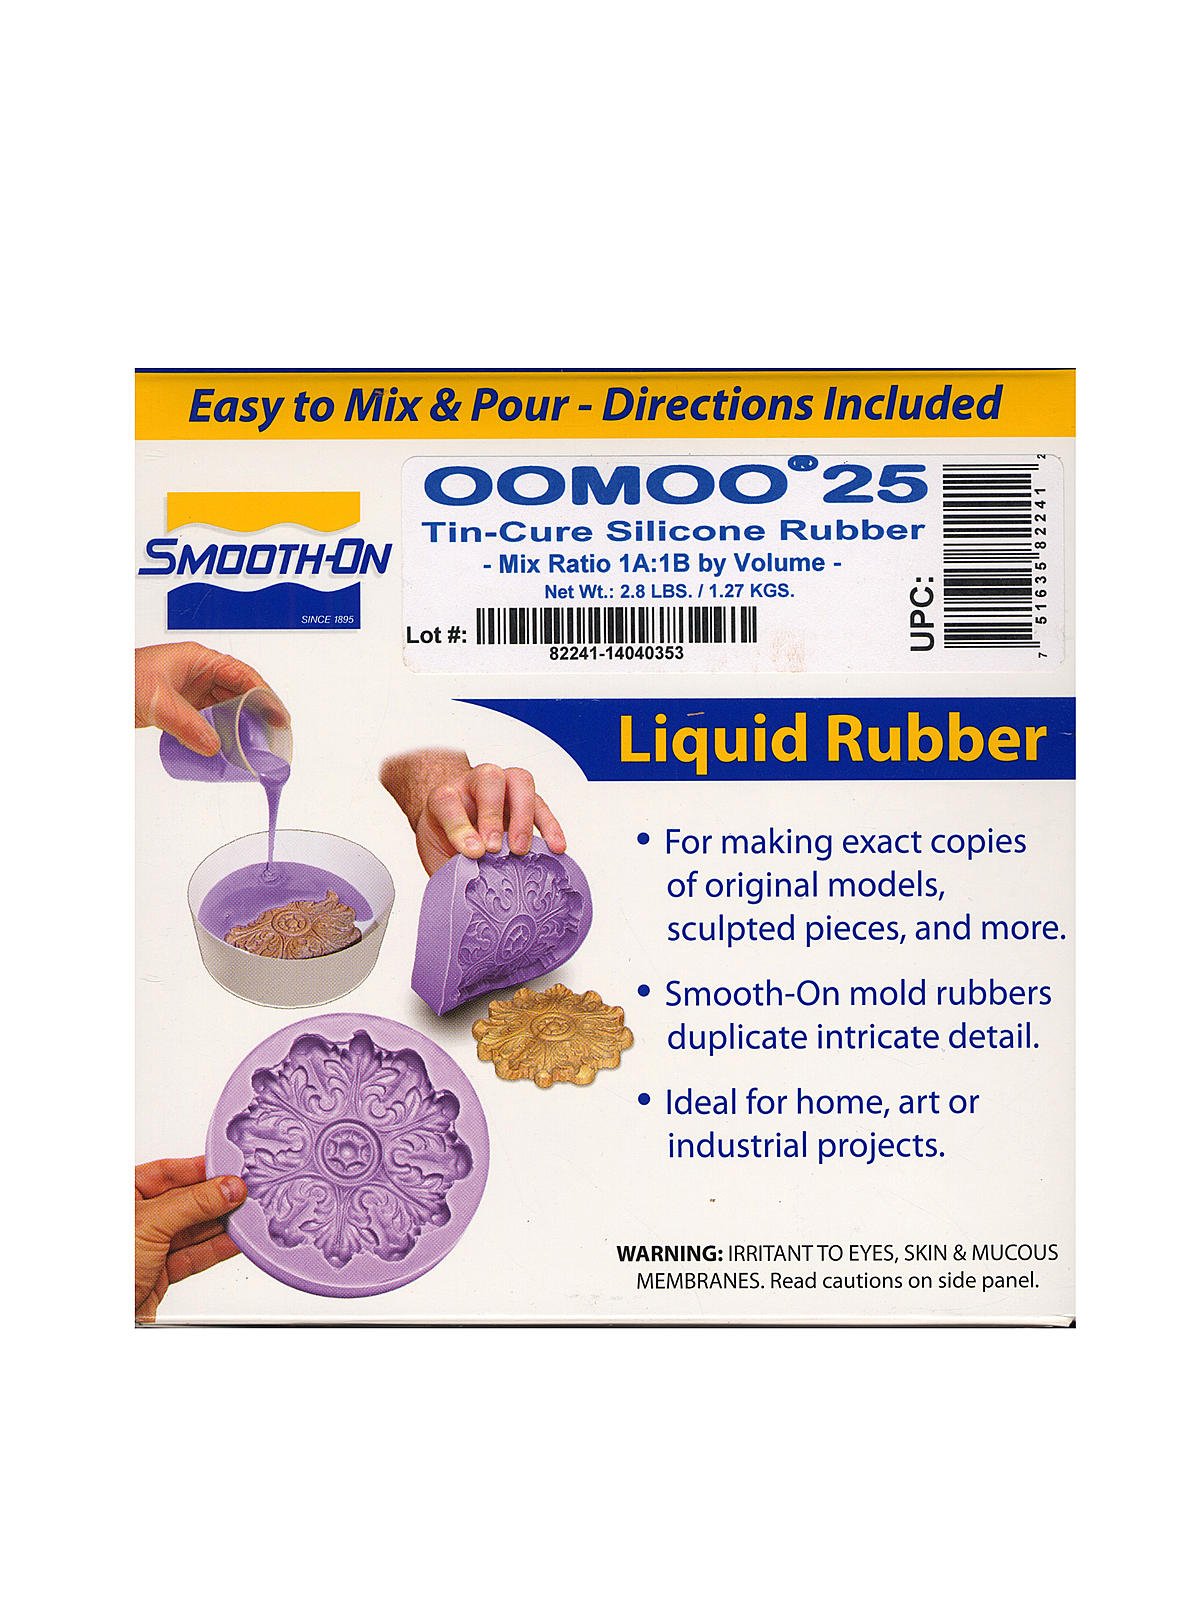 OOMOO 30-1A:1B Mix by Volume Tin Cure Silicone Algeria